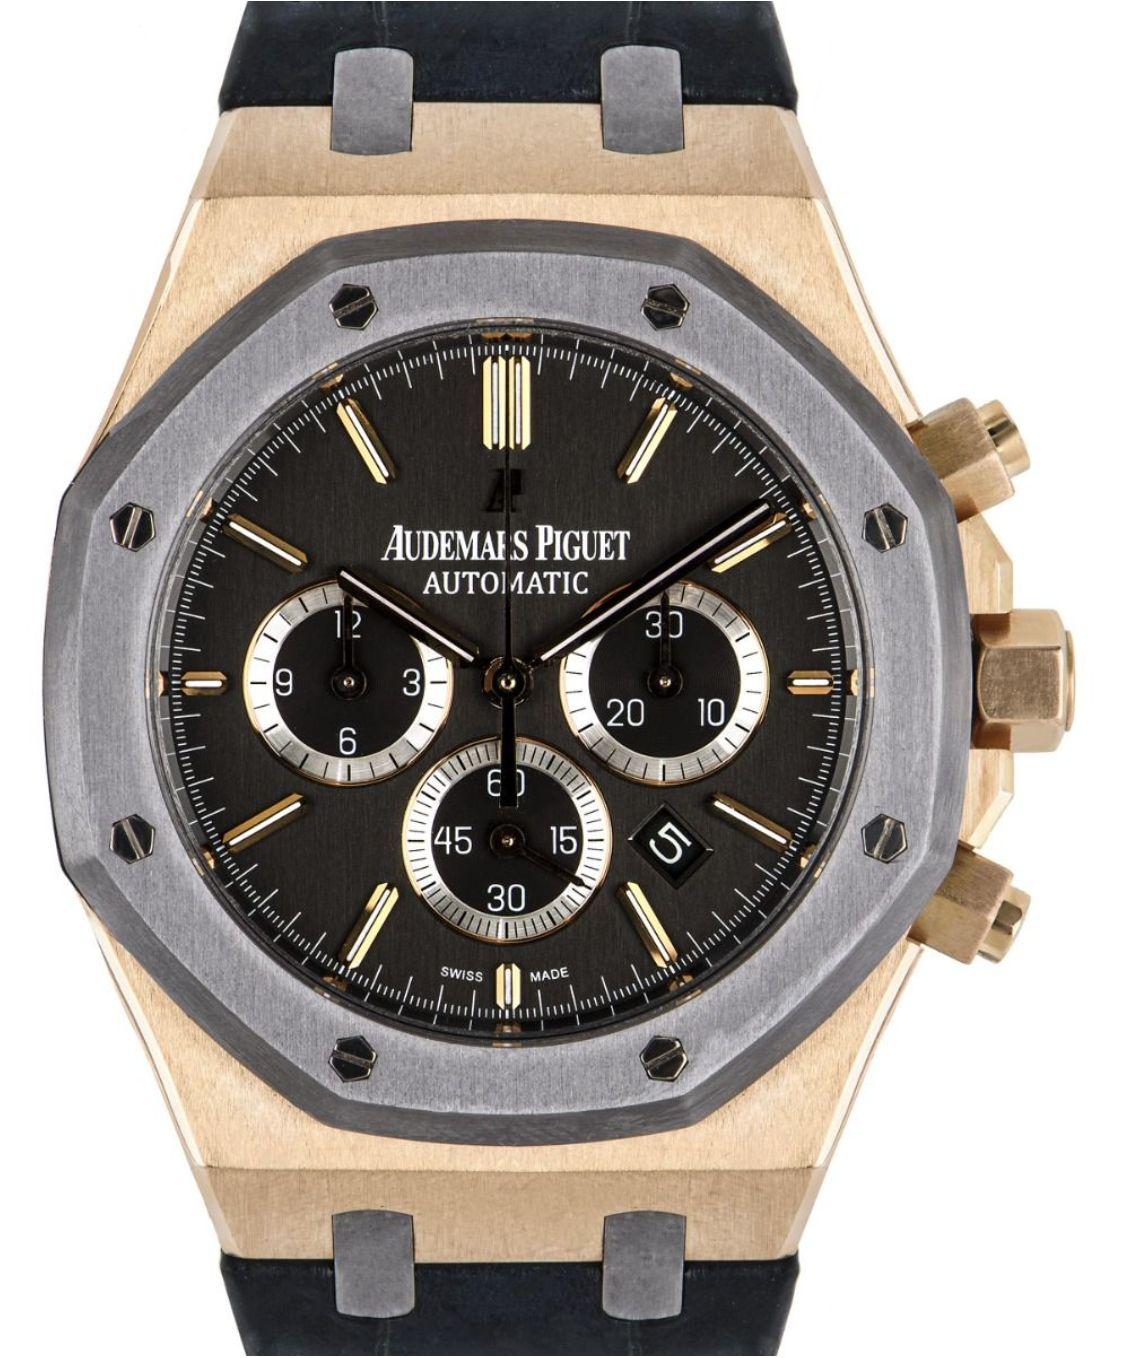 A limited edition Royal Oak Chronograph Leo Messi in rose gold by Audemars Piguet. Featuring a satin brushed anthracite dial with a date display and three chronograph counters. The iconic eight screws feature on the tantalum bezel.

An Audemars